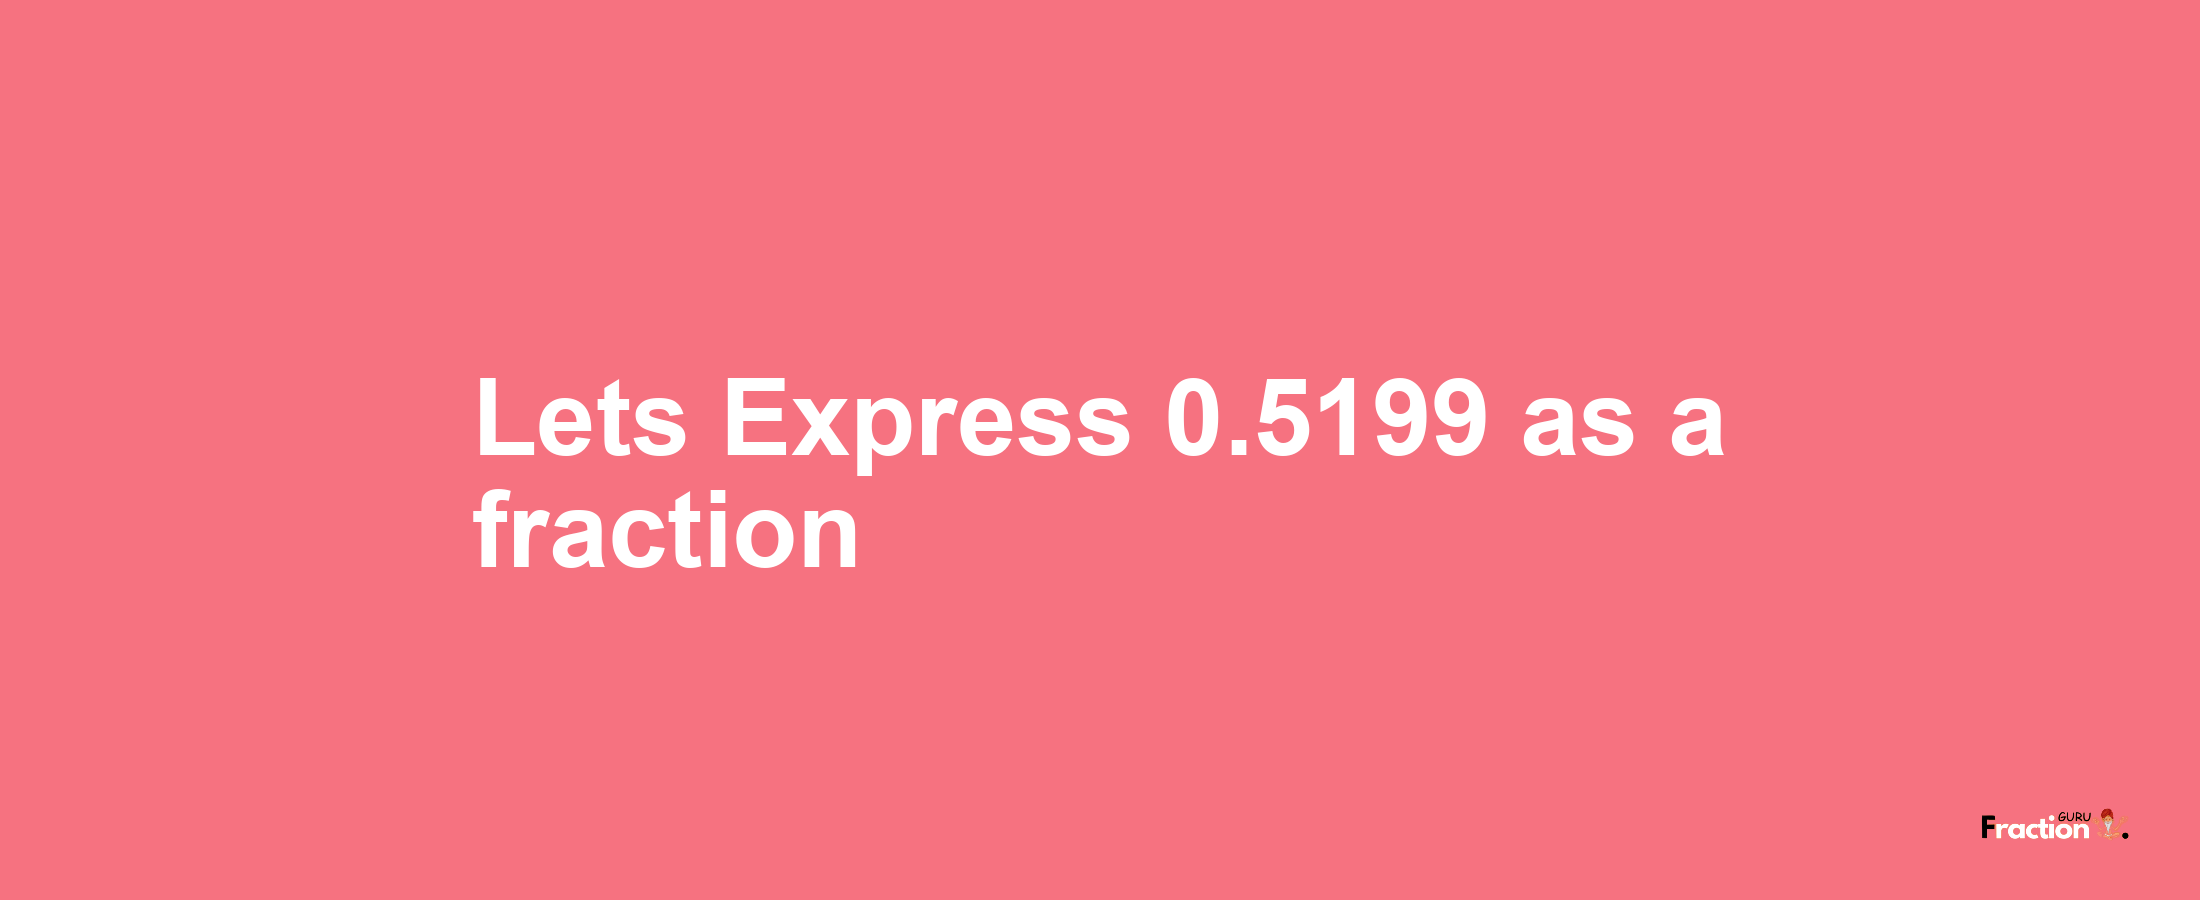 Lets Express 0.5199 as afraction